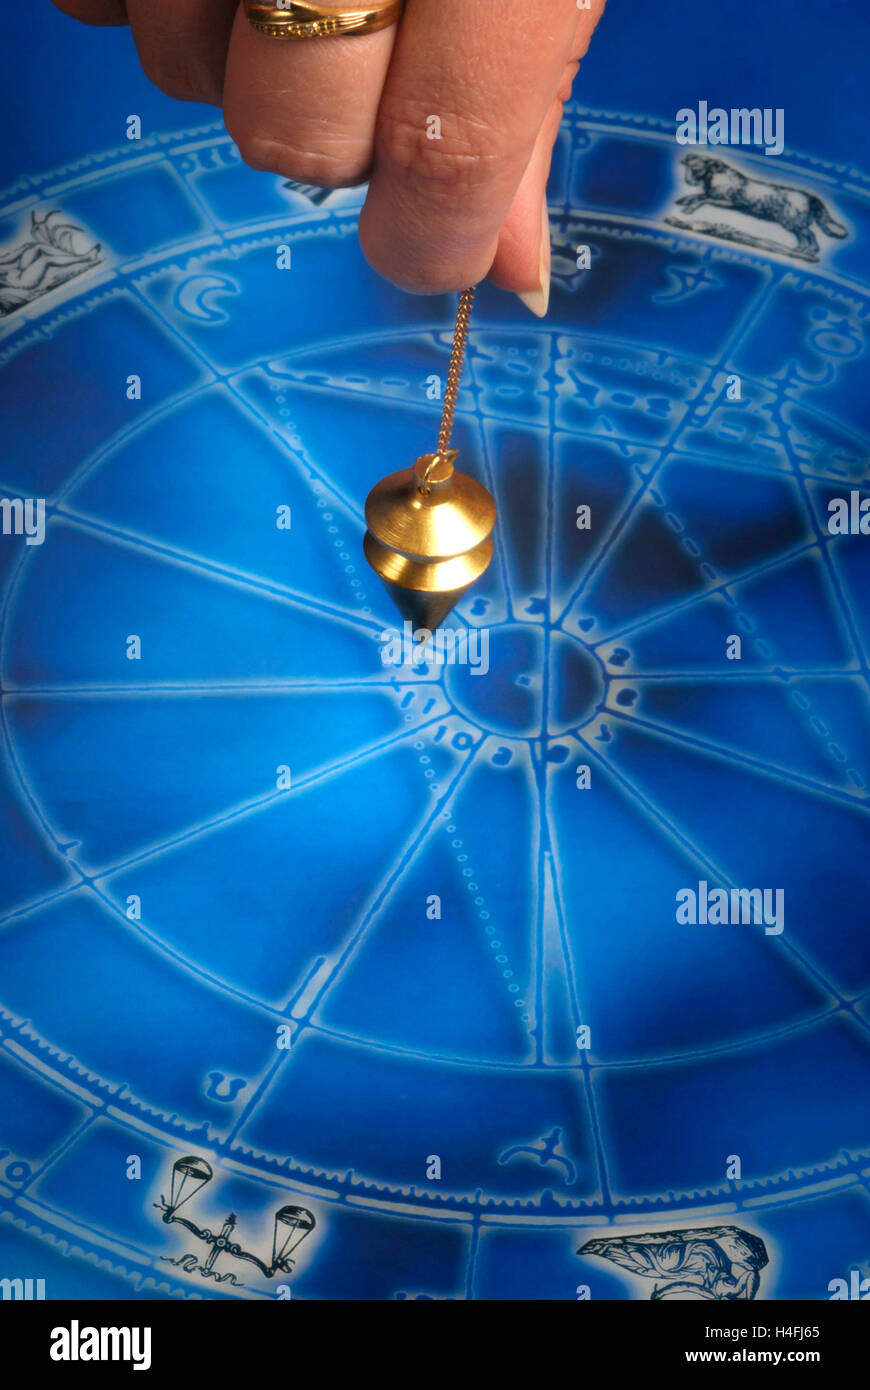 astrology and divination concept Stock Photo